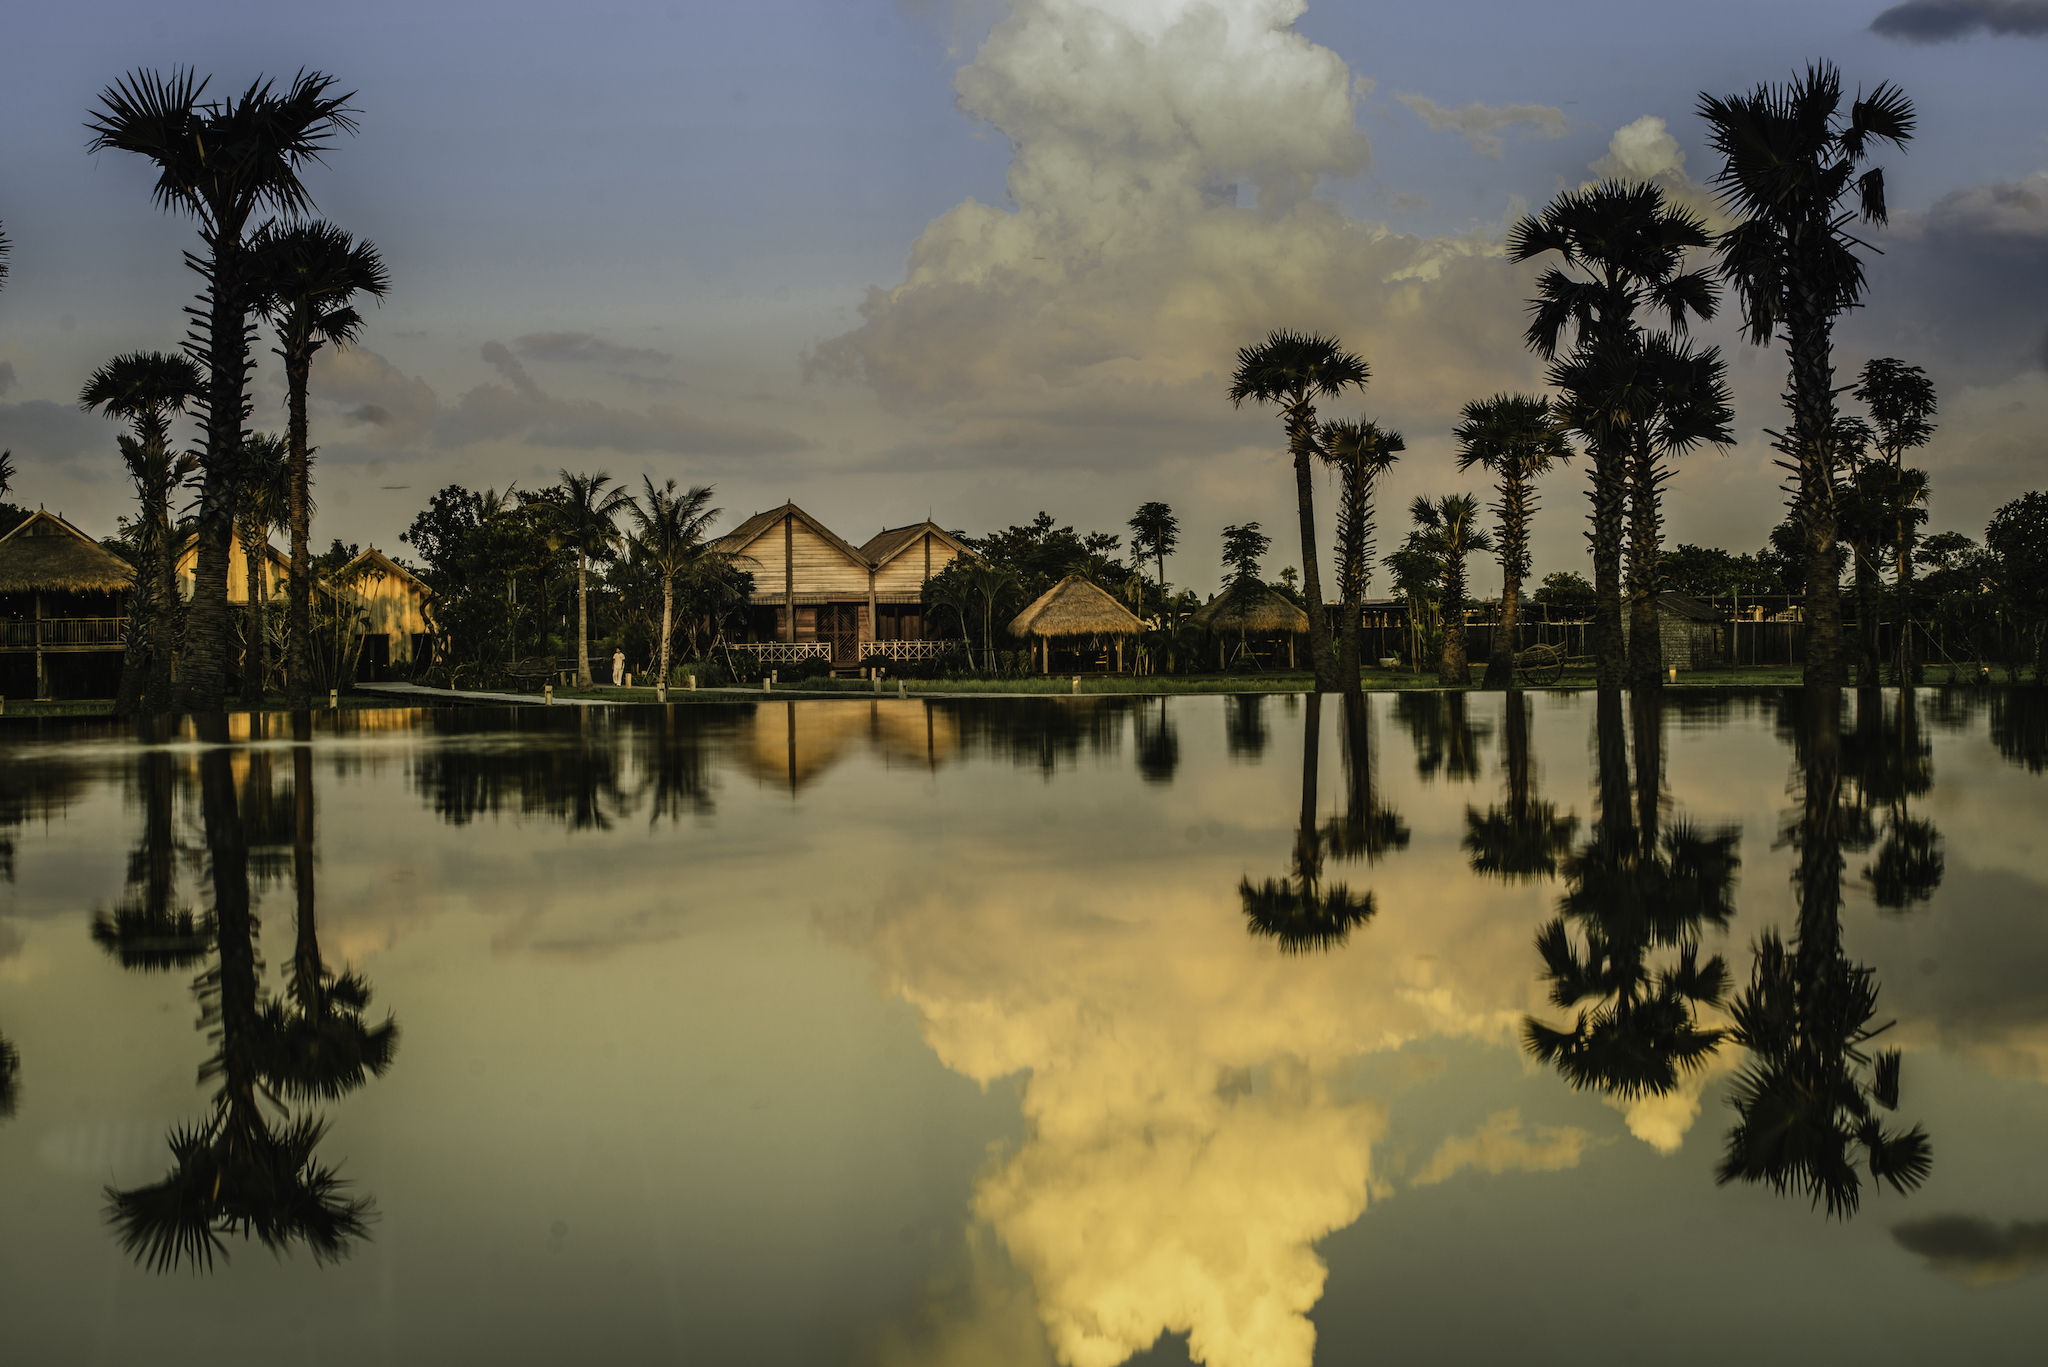 You Can Have Both Classic Luxury And Authentic Immersion In Siem Reap